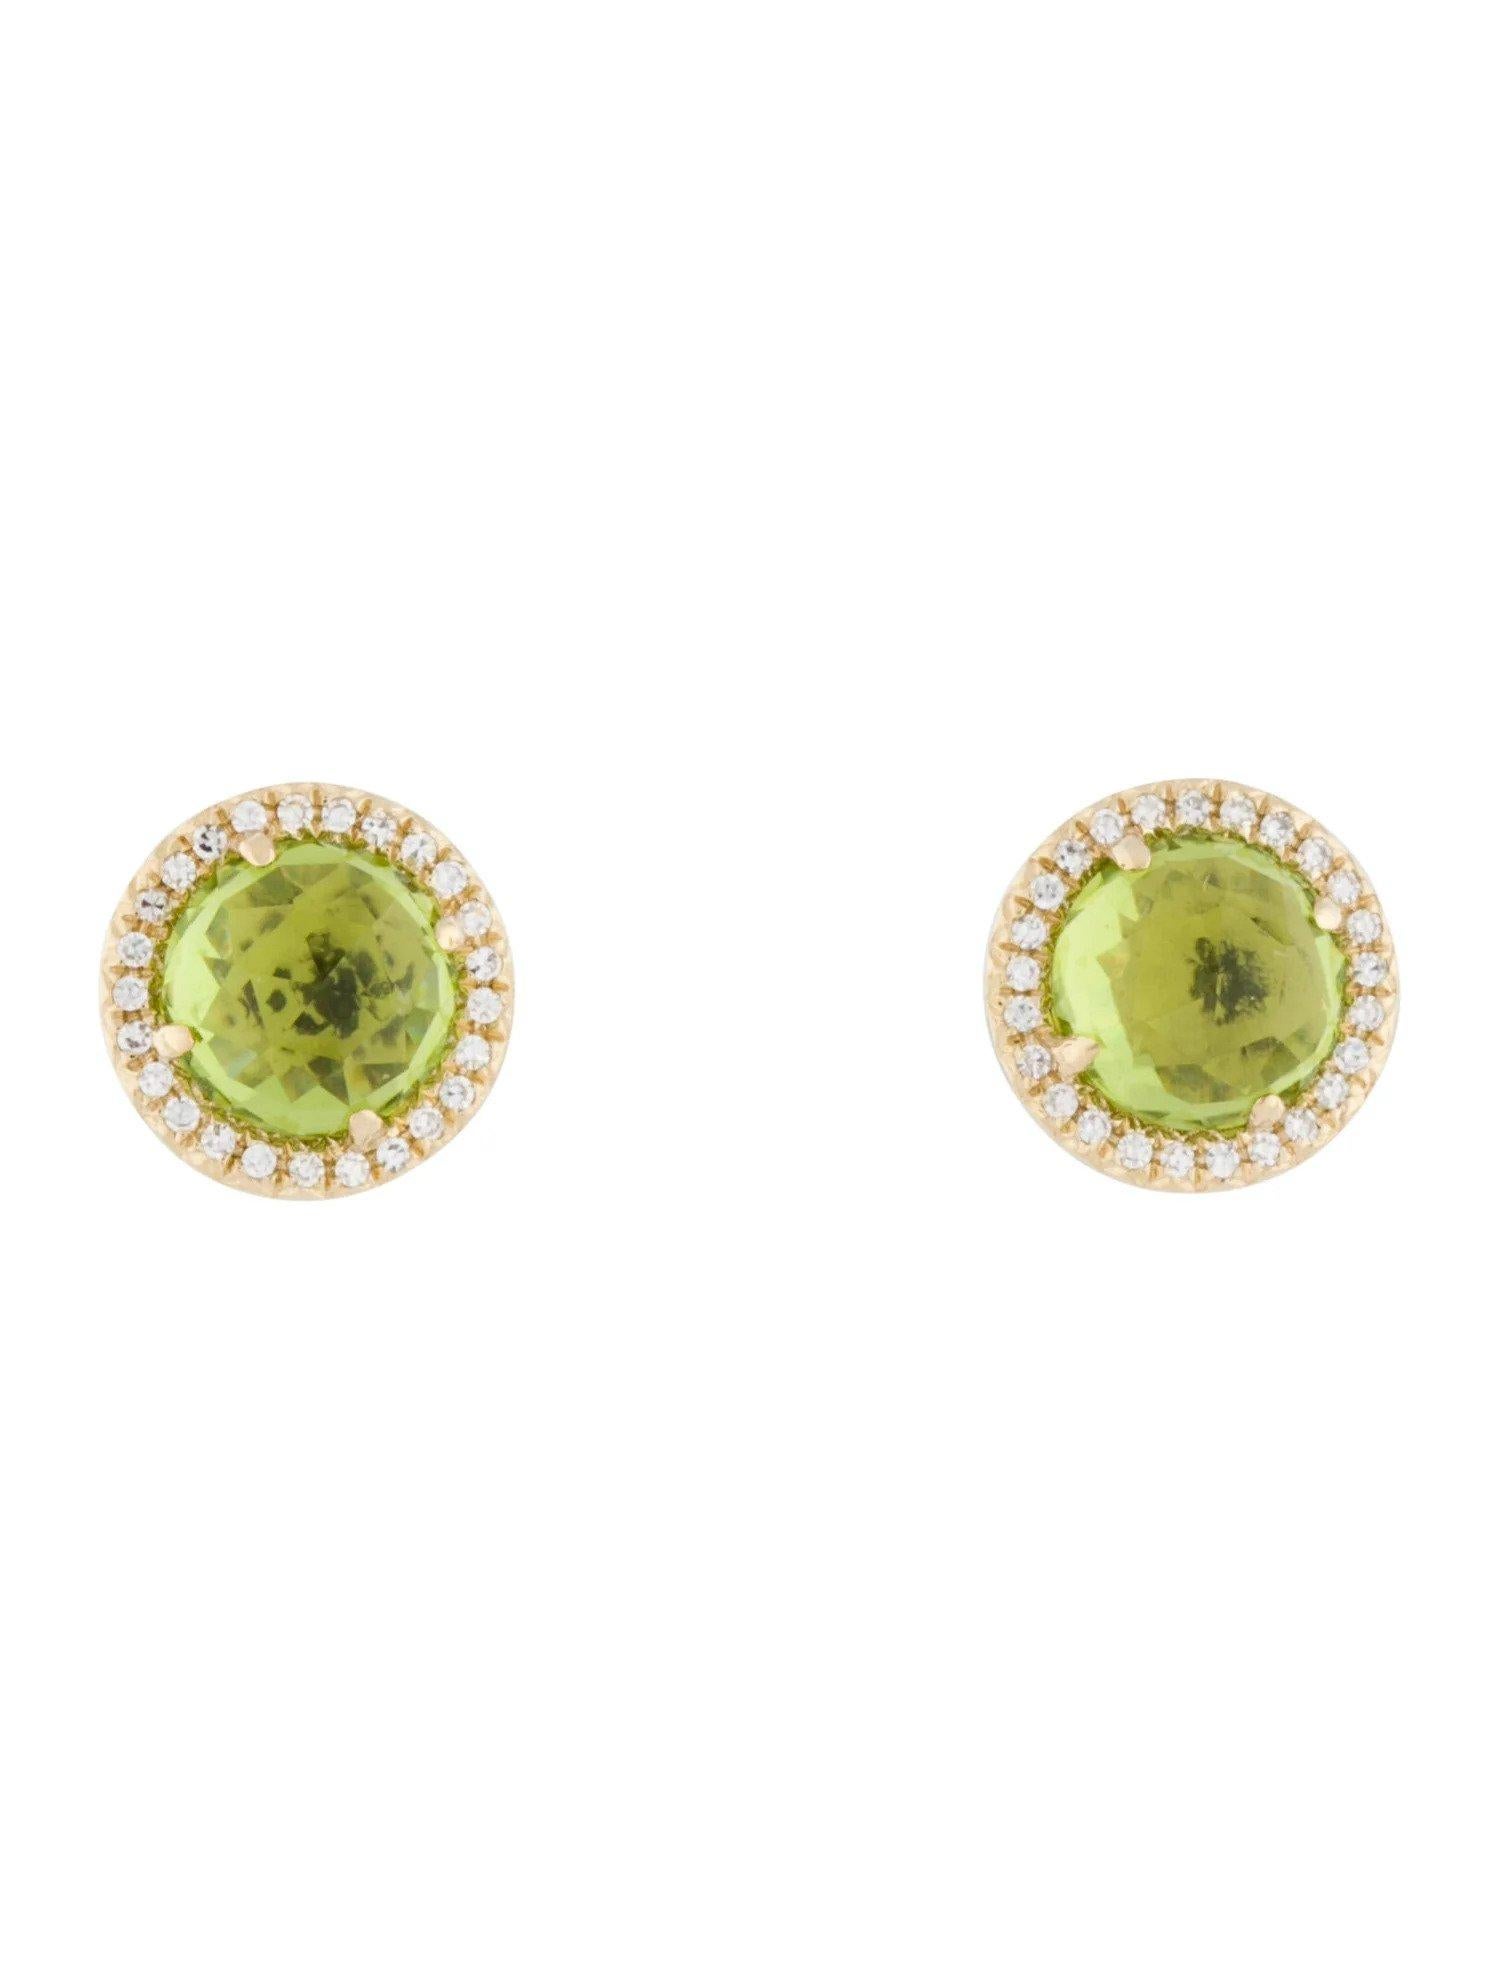 These Peridot  & Diamond Earrings are a stunning and timeless accessory that can add a touch of glamour and sophistication to any outfit. 

These earrings each feature a 1.15 Carat Round Peridot , with a Diamond Halo comprised of 0.06 Carats of